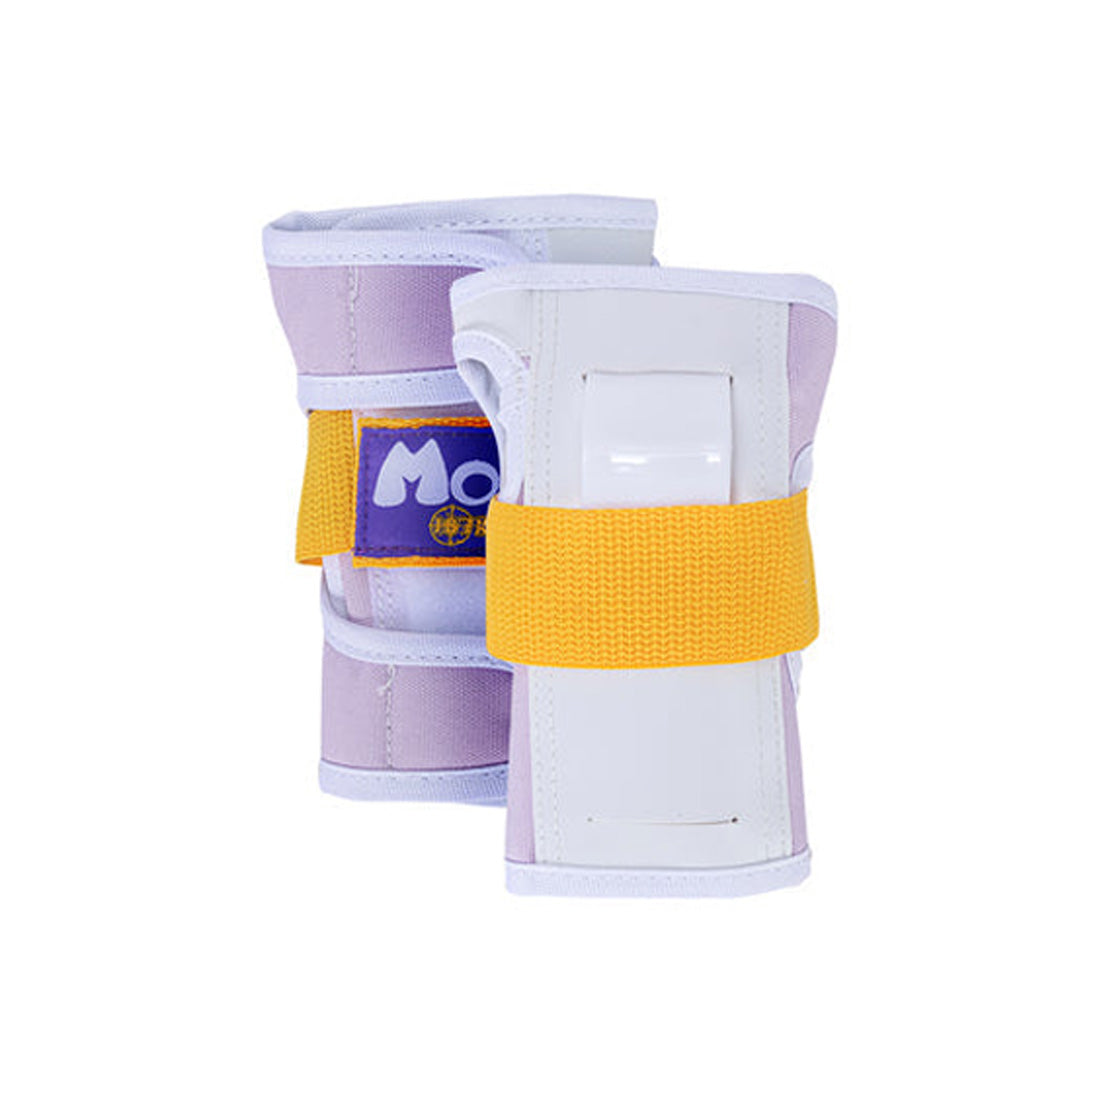 187 Six-Pack Adult - Moxi Lavender Protective Gear